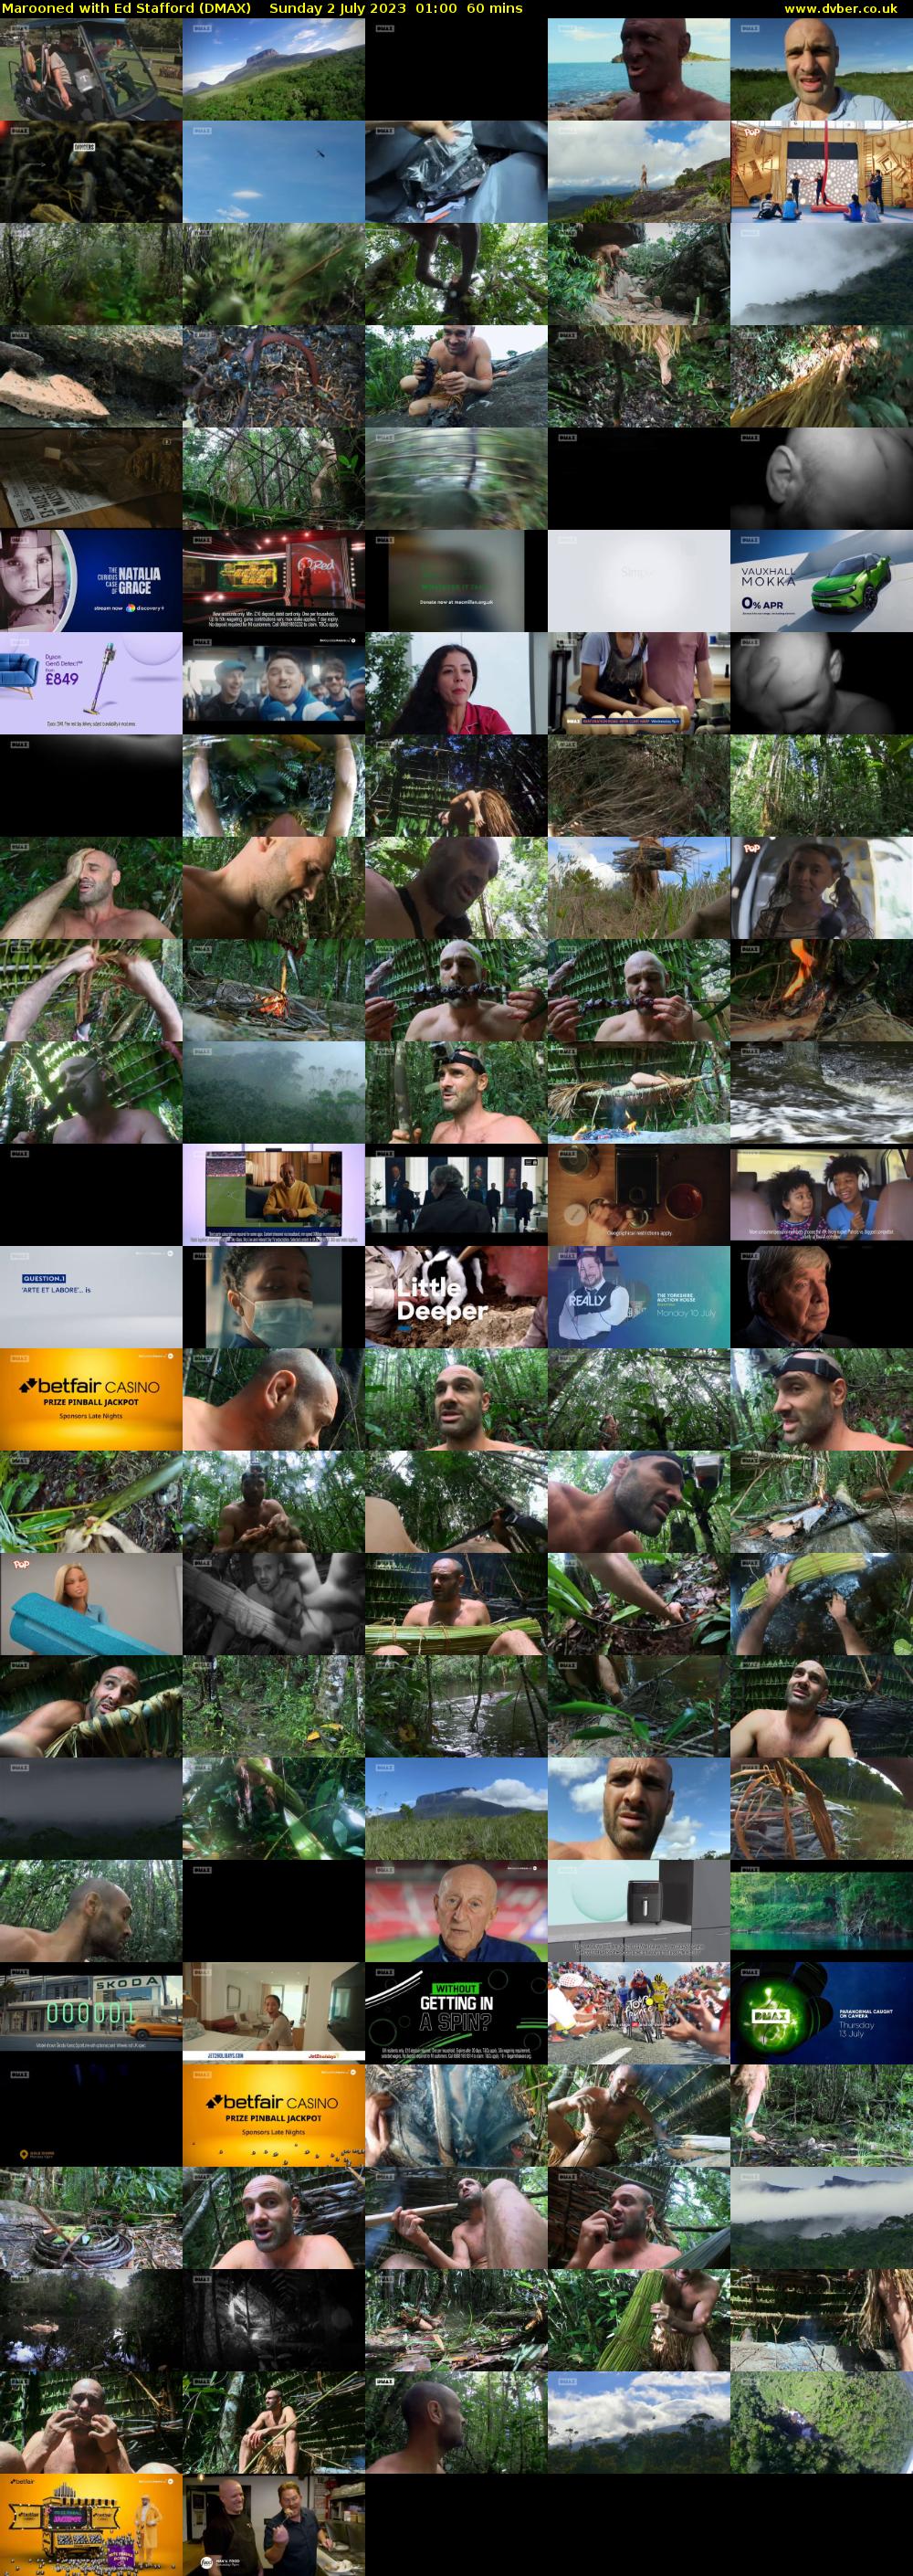 Marooned with Ed Stafford (DMAX) Sunday 2 July 2023 01:00 - 02:00